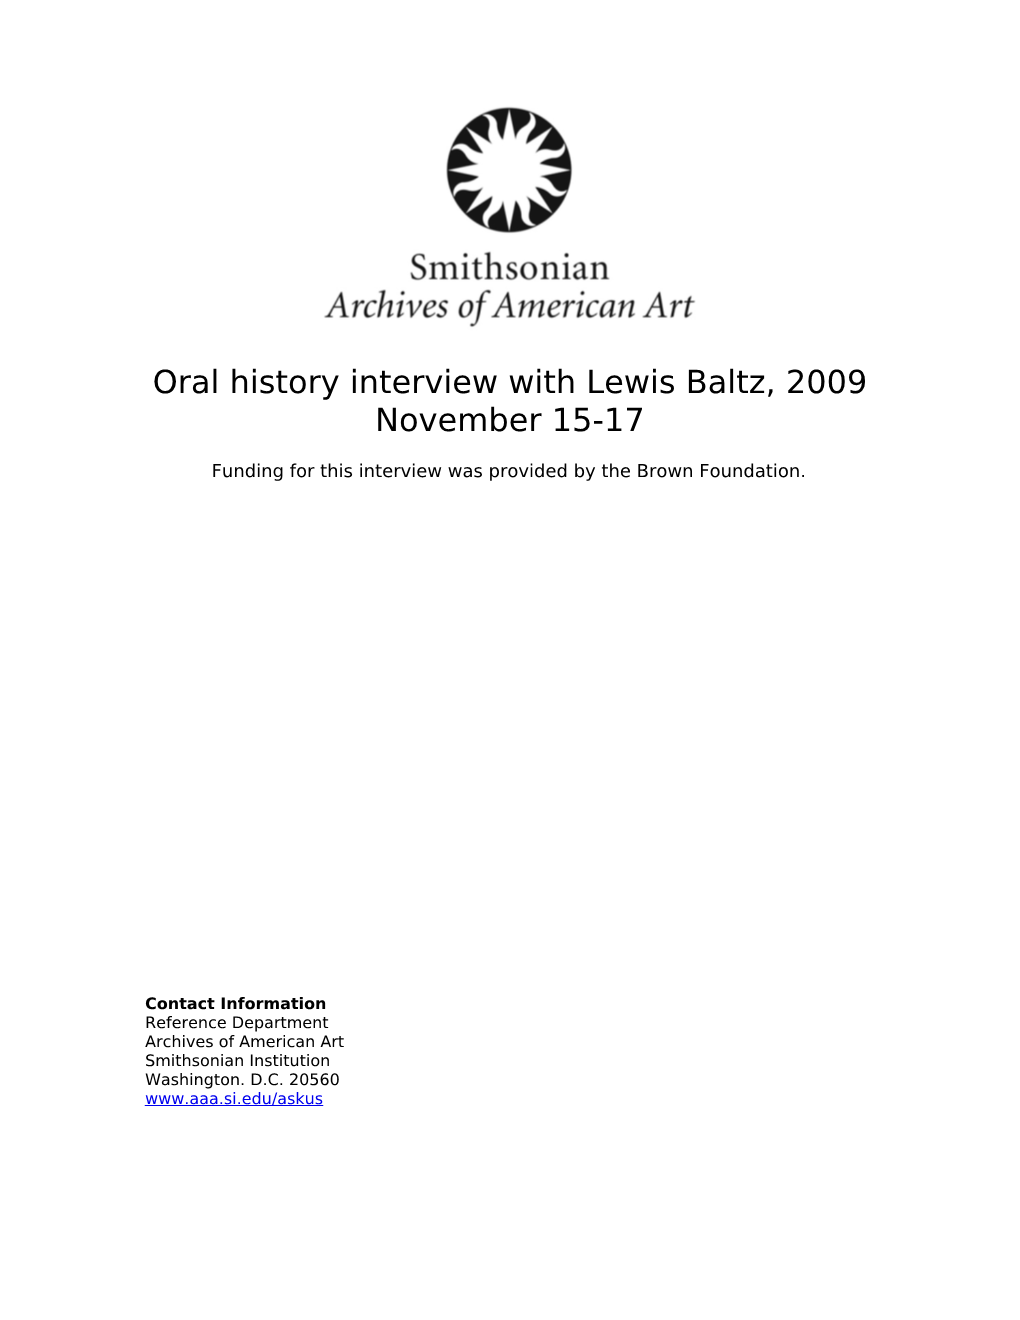 Oral History Interview with Lewis Baltz, 2009 November 15-17